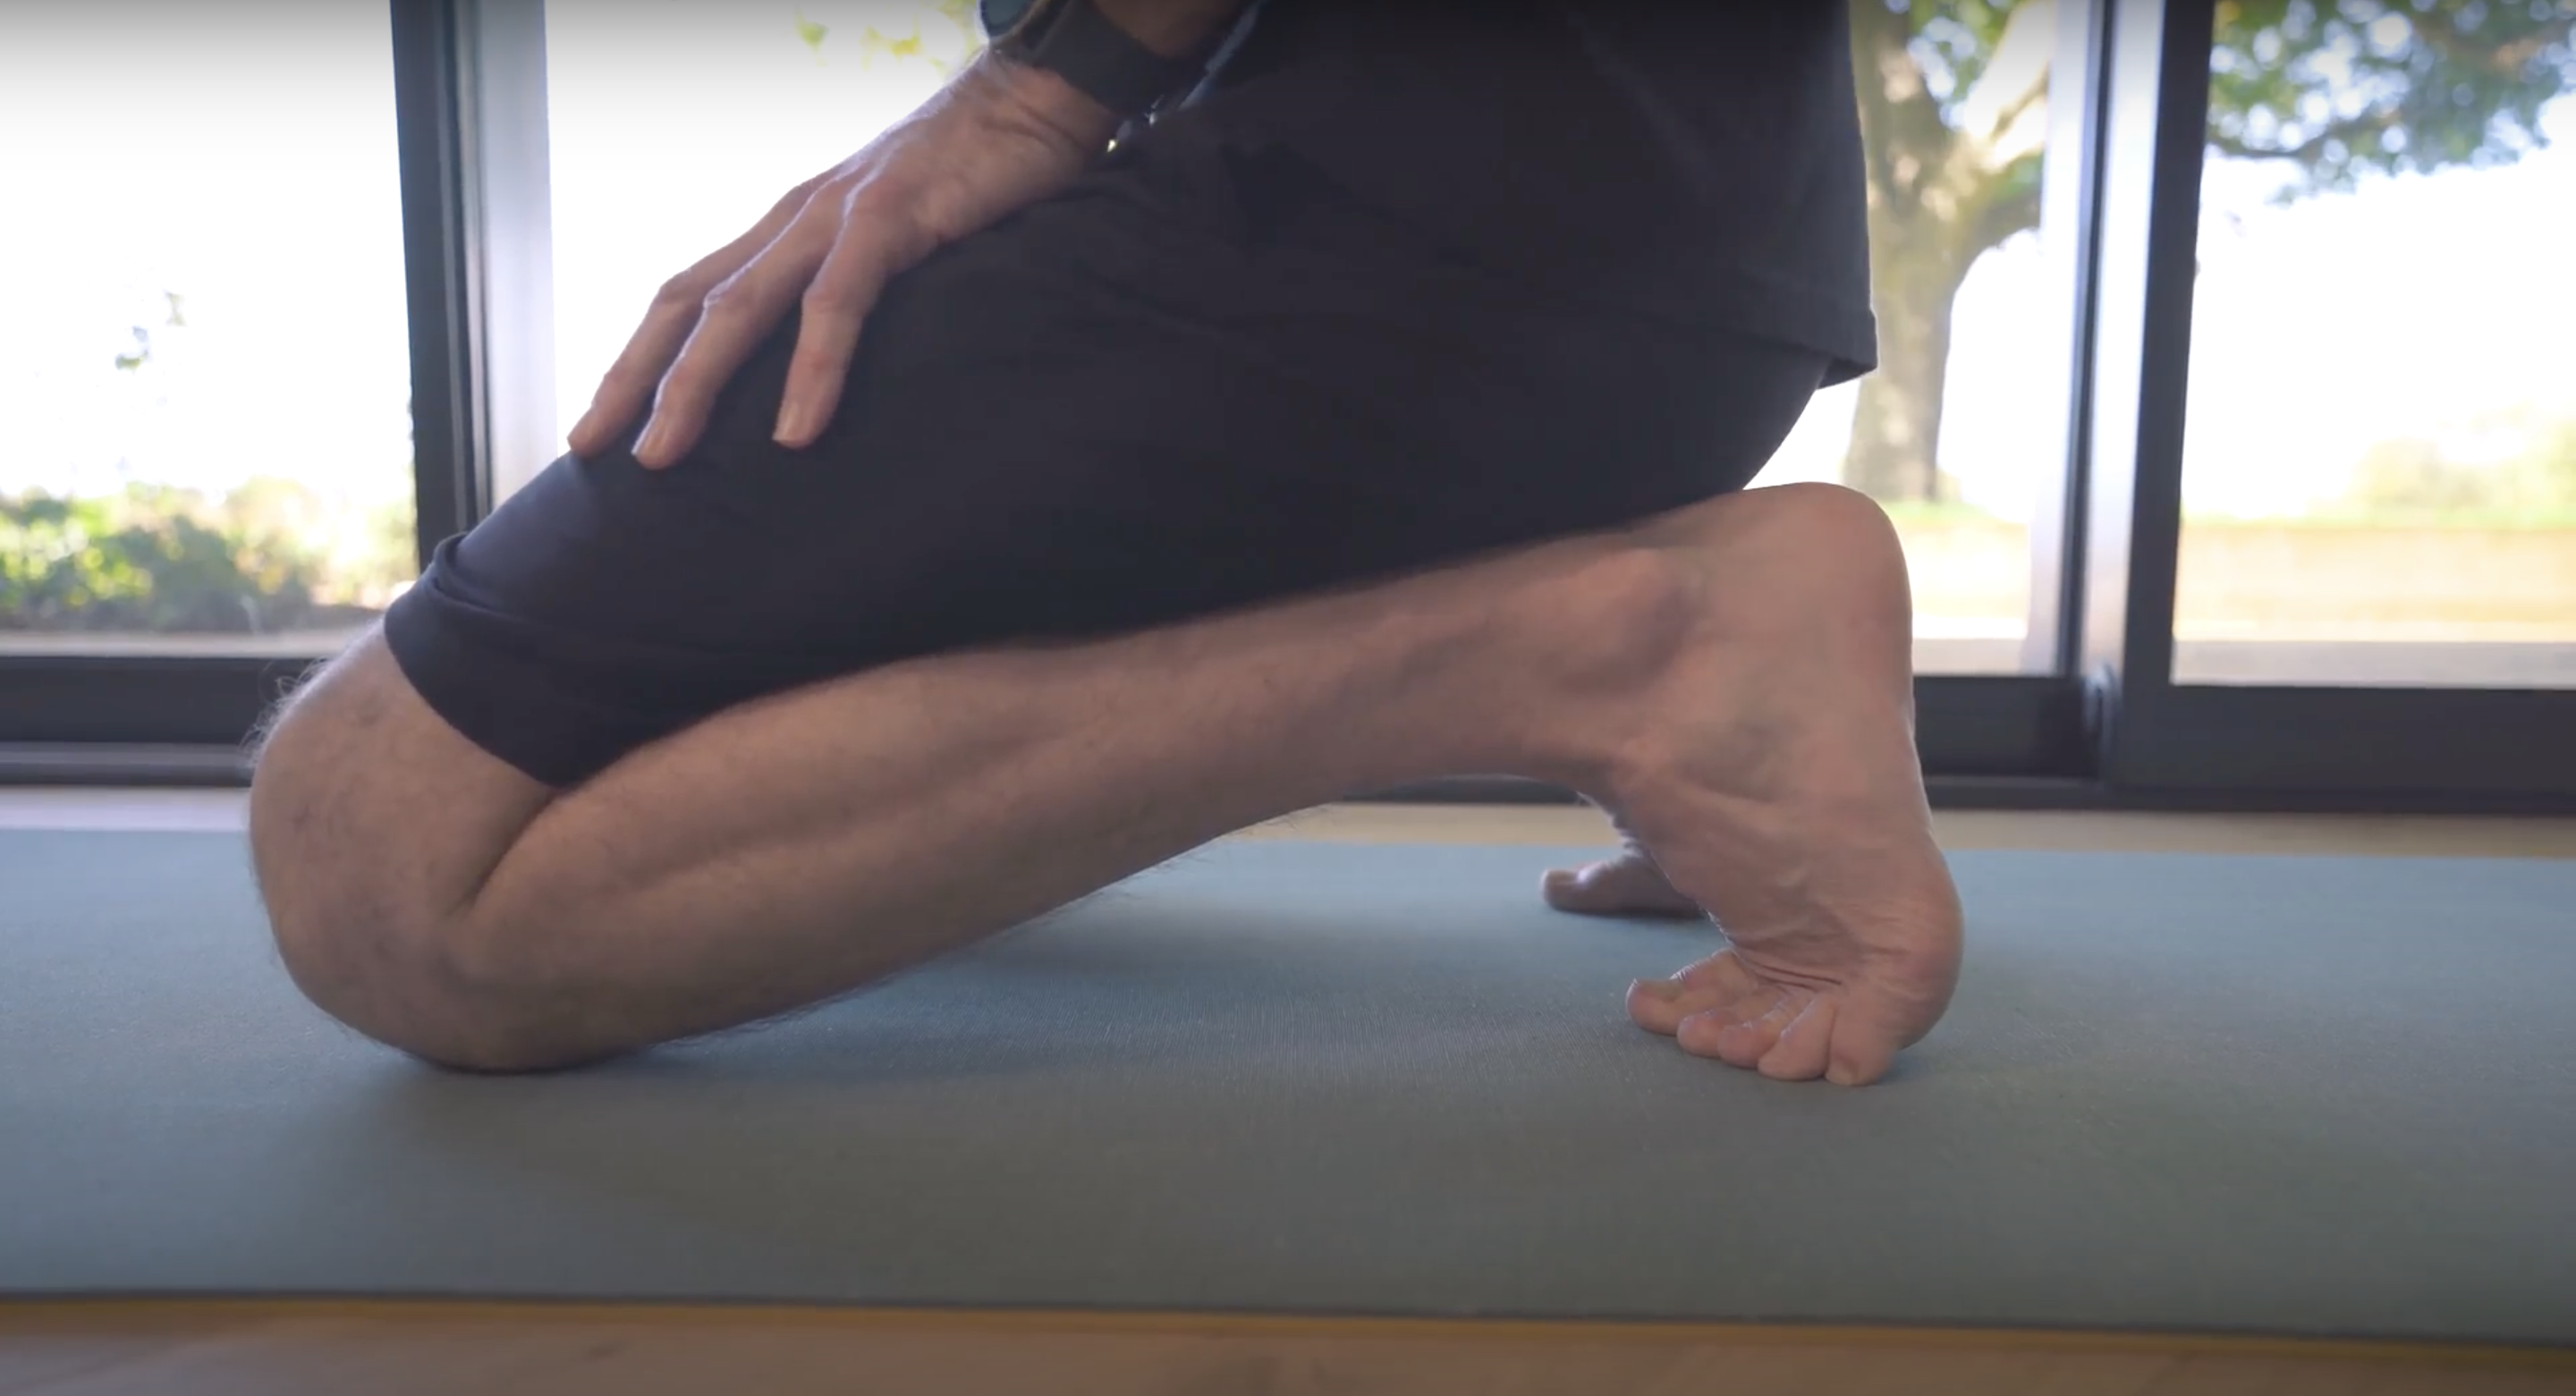 Feet Health: How To Strengthen & Stretch Your Feet